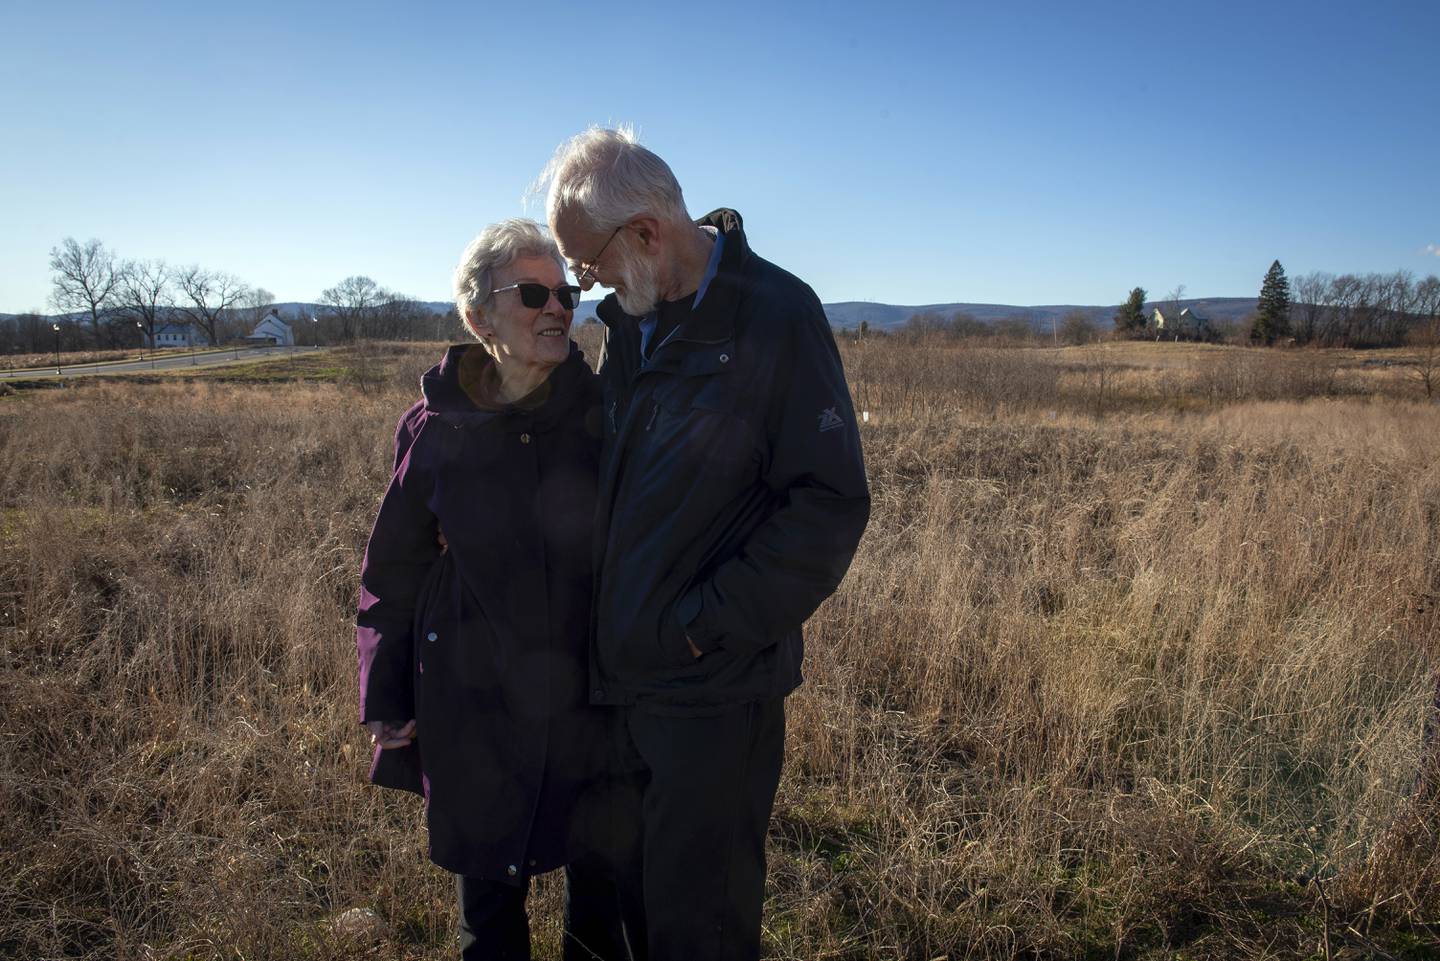 Jim and Letty Carpenter walk in a field near their home in Frederick, Md., Tuesday, Jan. 19, 2021. Jim, who cheers Biden as the rightful winner, is a member the Braver Angels program and meets regularly with neighbor Natalie Abbas, who believes the election was stolen, to ponder the greatest challenge facing Biden and American society: how can they find common ground if they no longer exist in the same reality? (AP Photo/Cliff Owen)